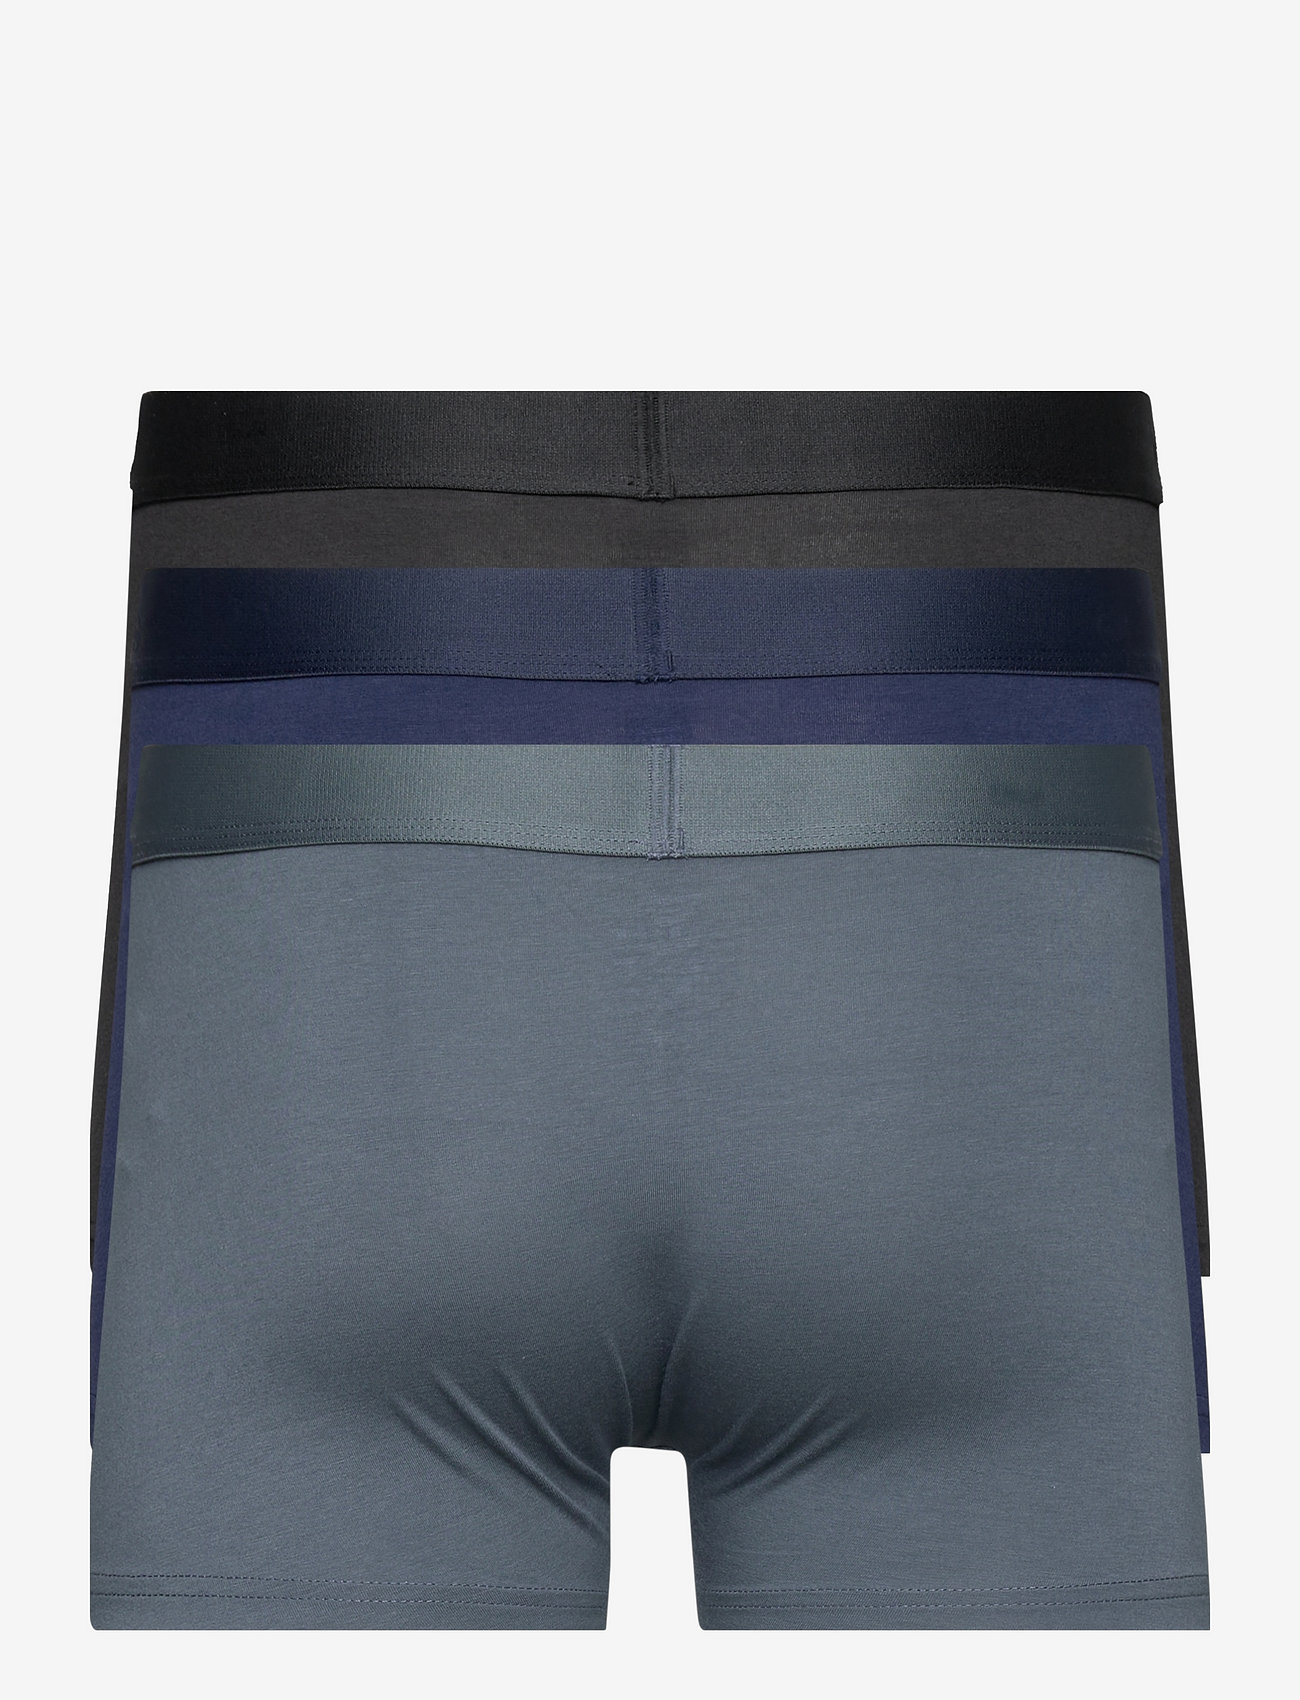 Resteröds Trunk Bamboo 3 Pack Boxers